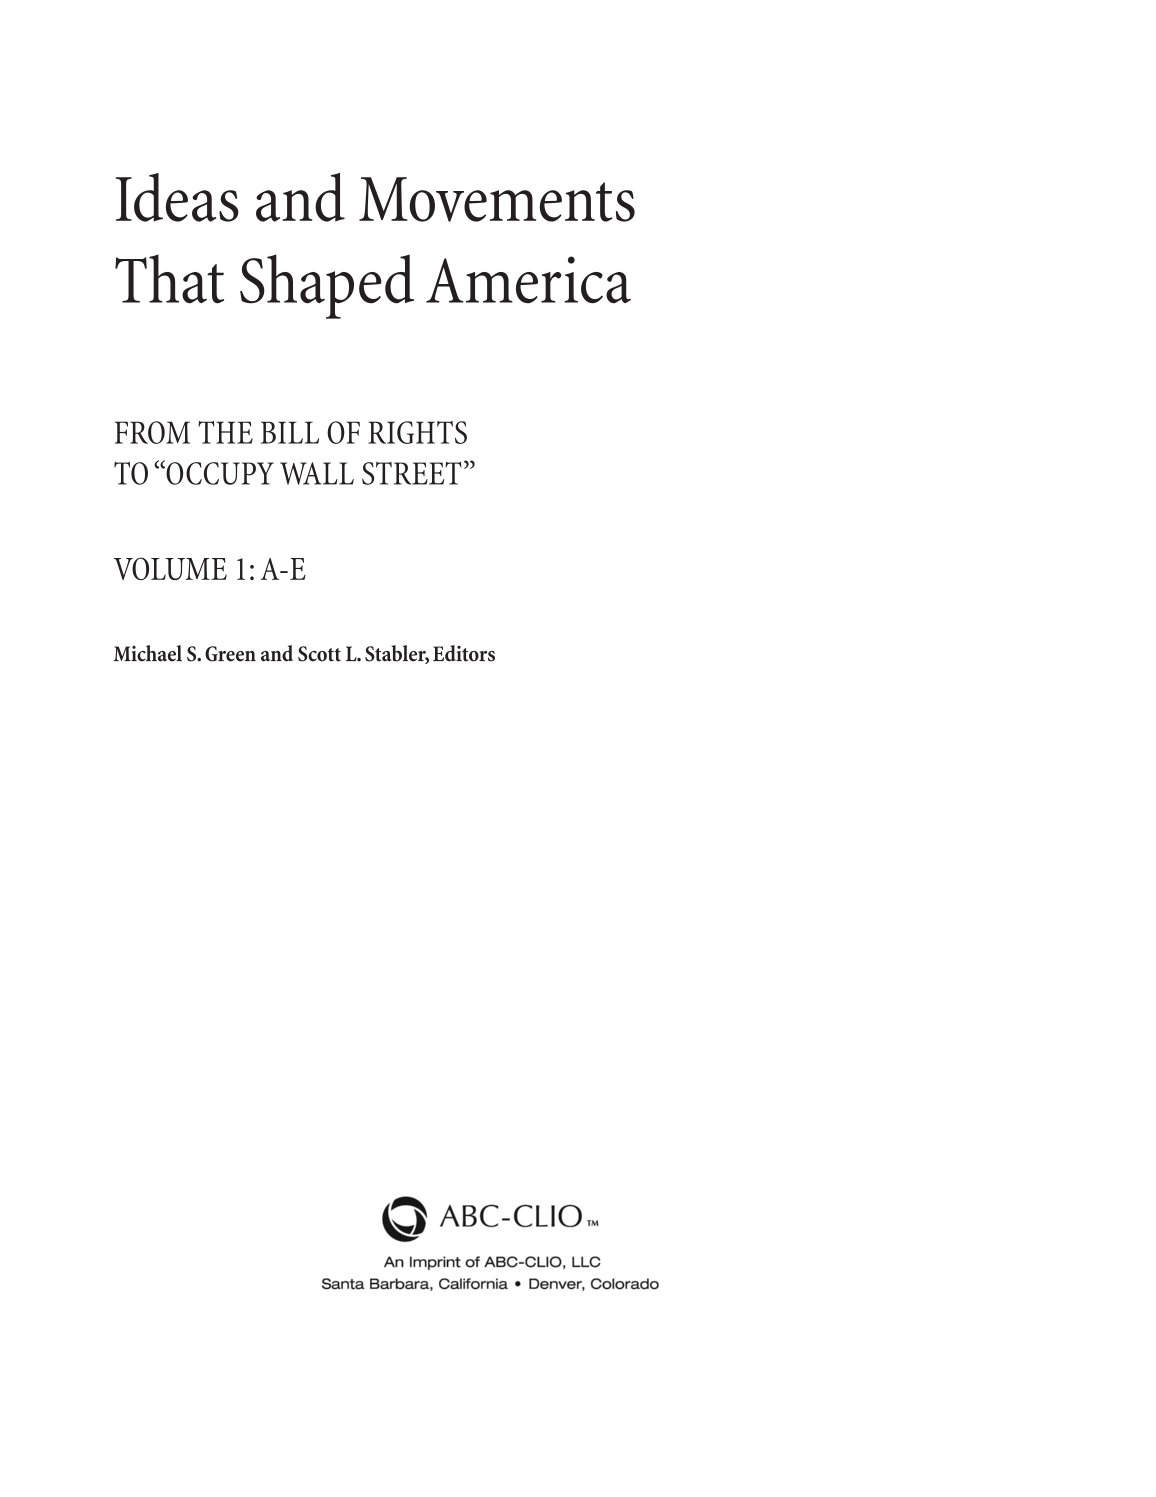 Ideas and Movements that Shaped America: From the Bill of Rights to "Occupy Wall Street" [3 volumes] page iii